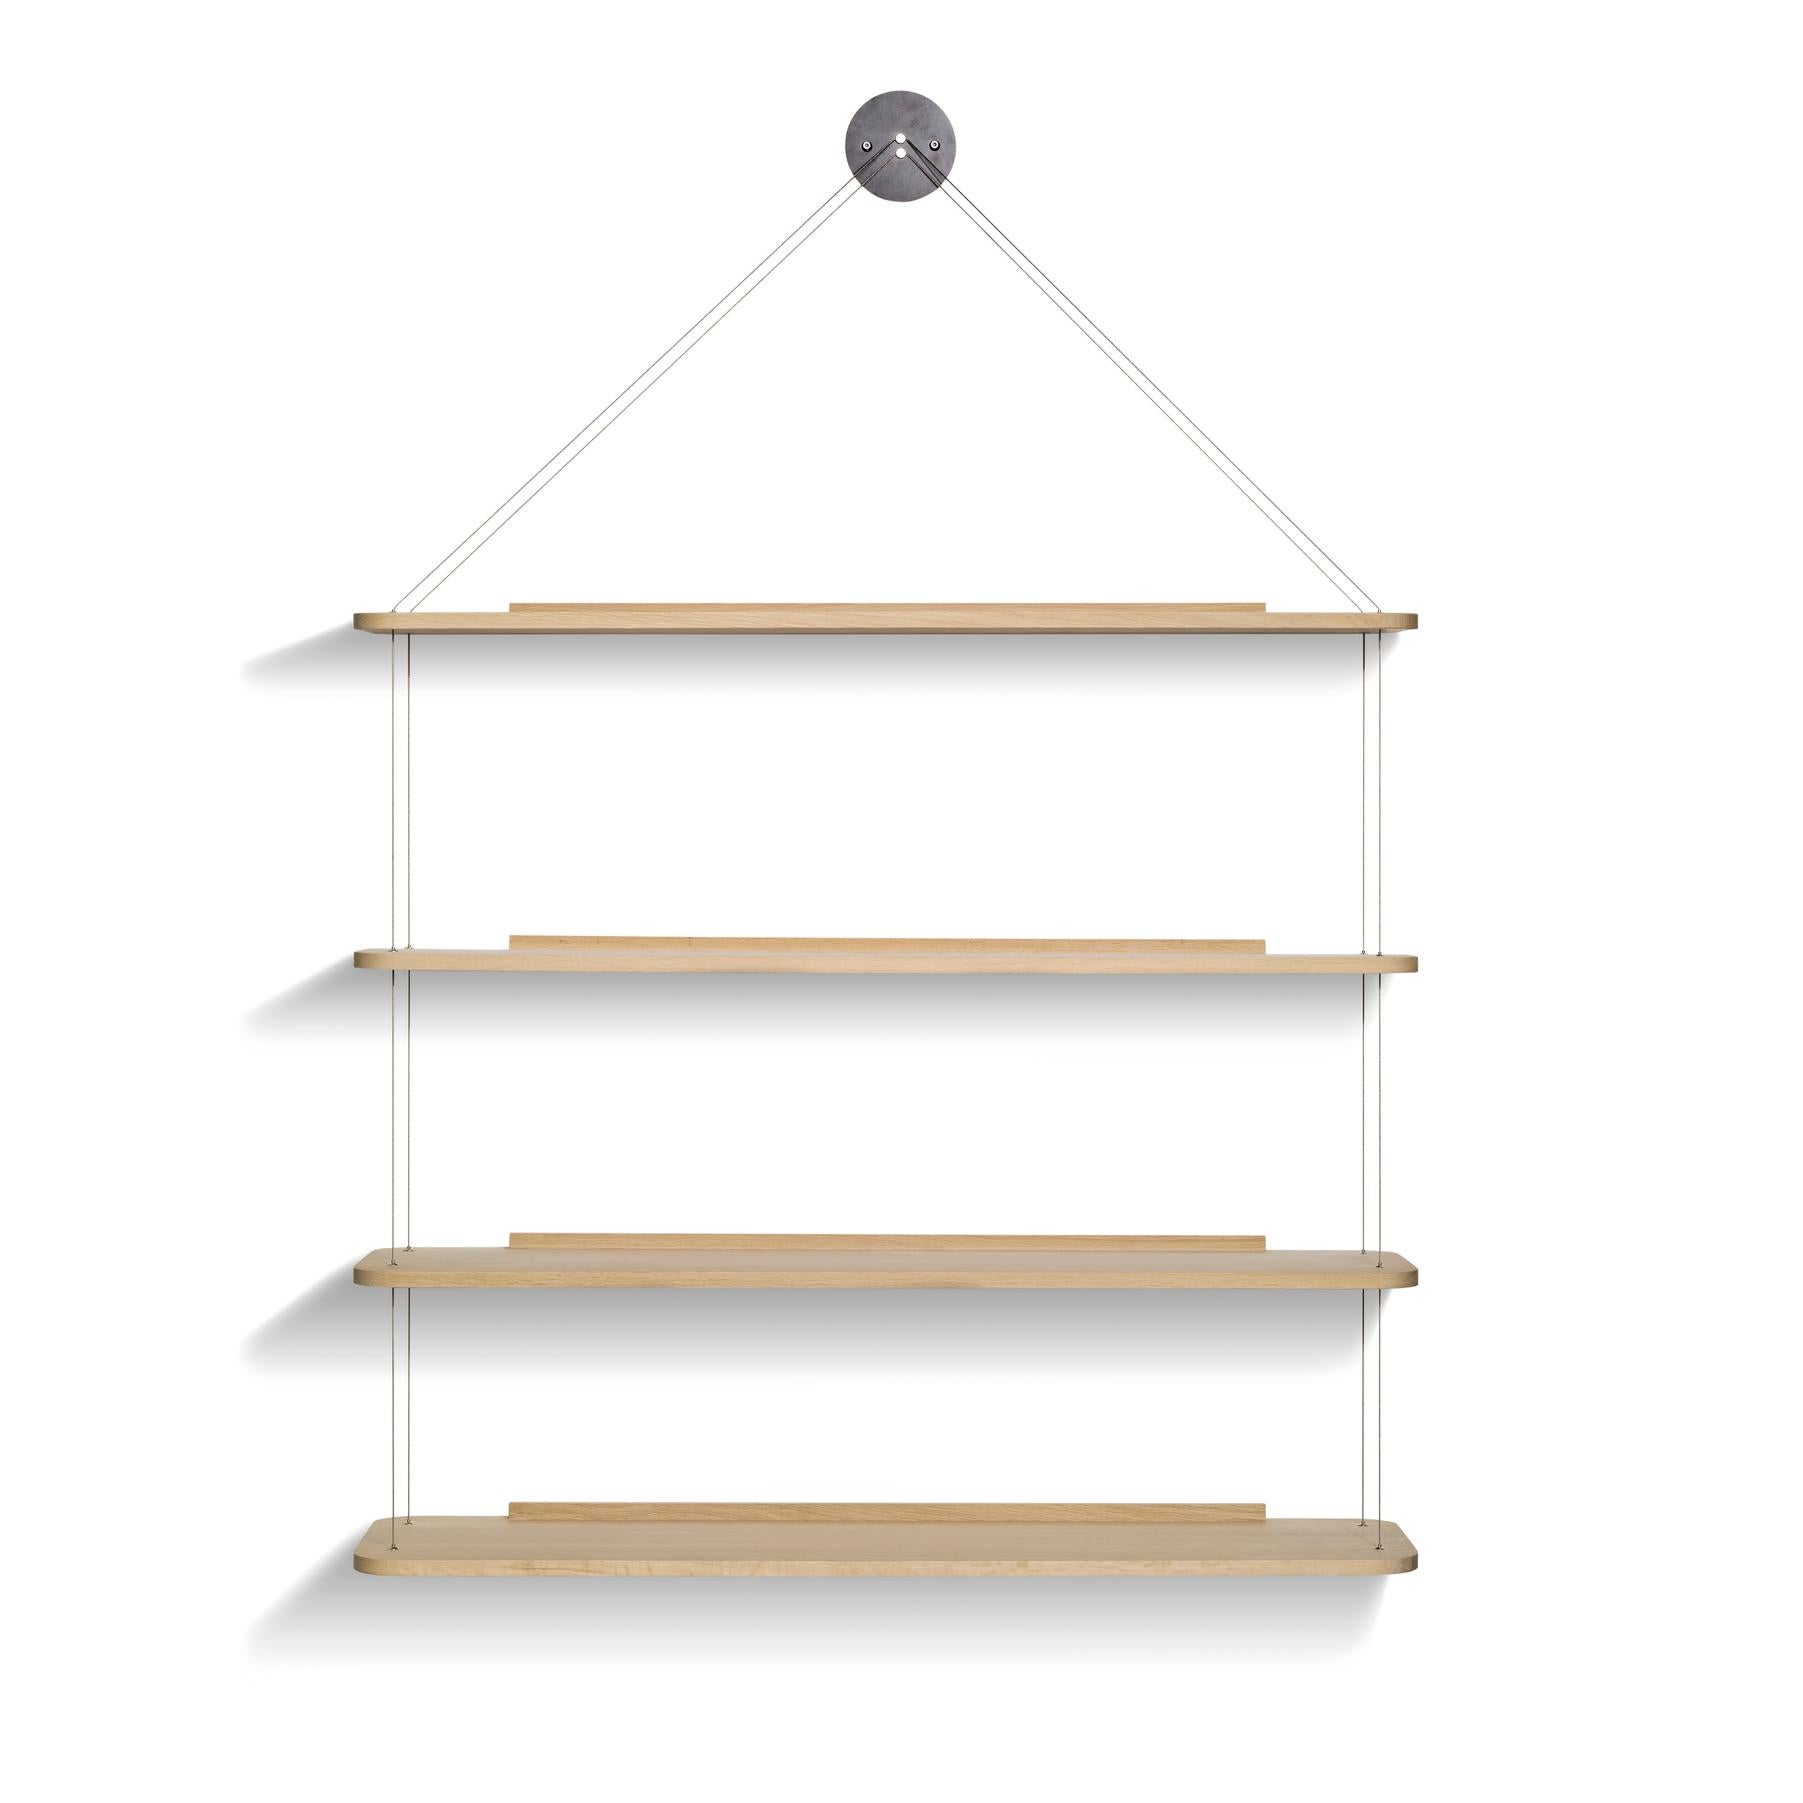 Shelve designed by Achille Castiglioni and Pier Giacomo Castiglioni in 1957.

Originally designed in 1957, perfected over the years, and produced by Bernini in 1966. Seeking to pare down the structure of a bookcase to the absolute minimum,